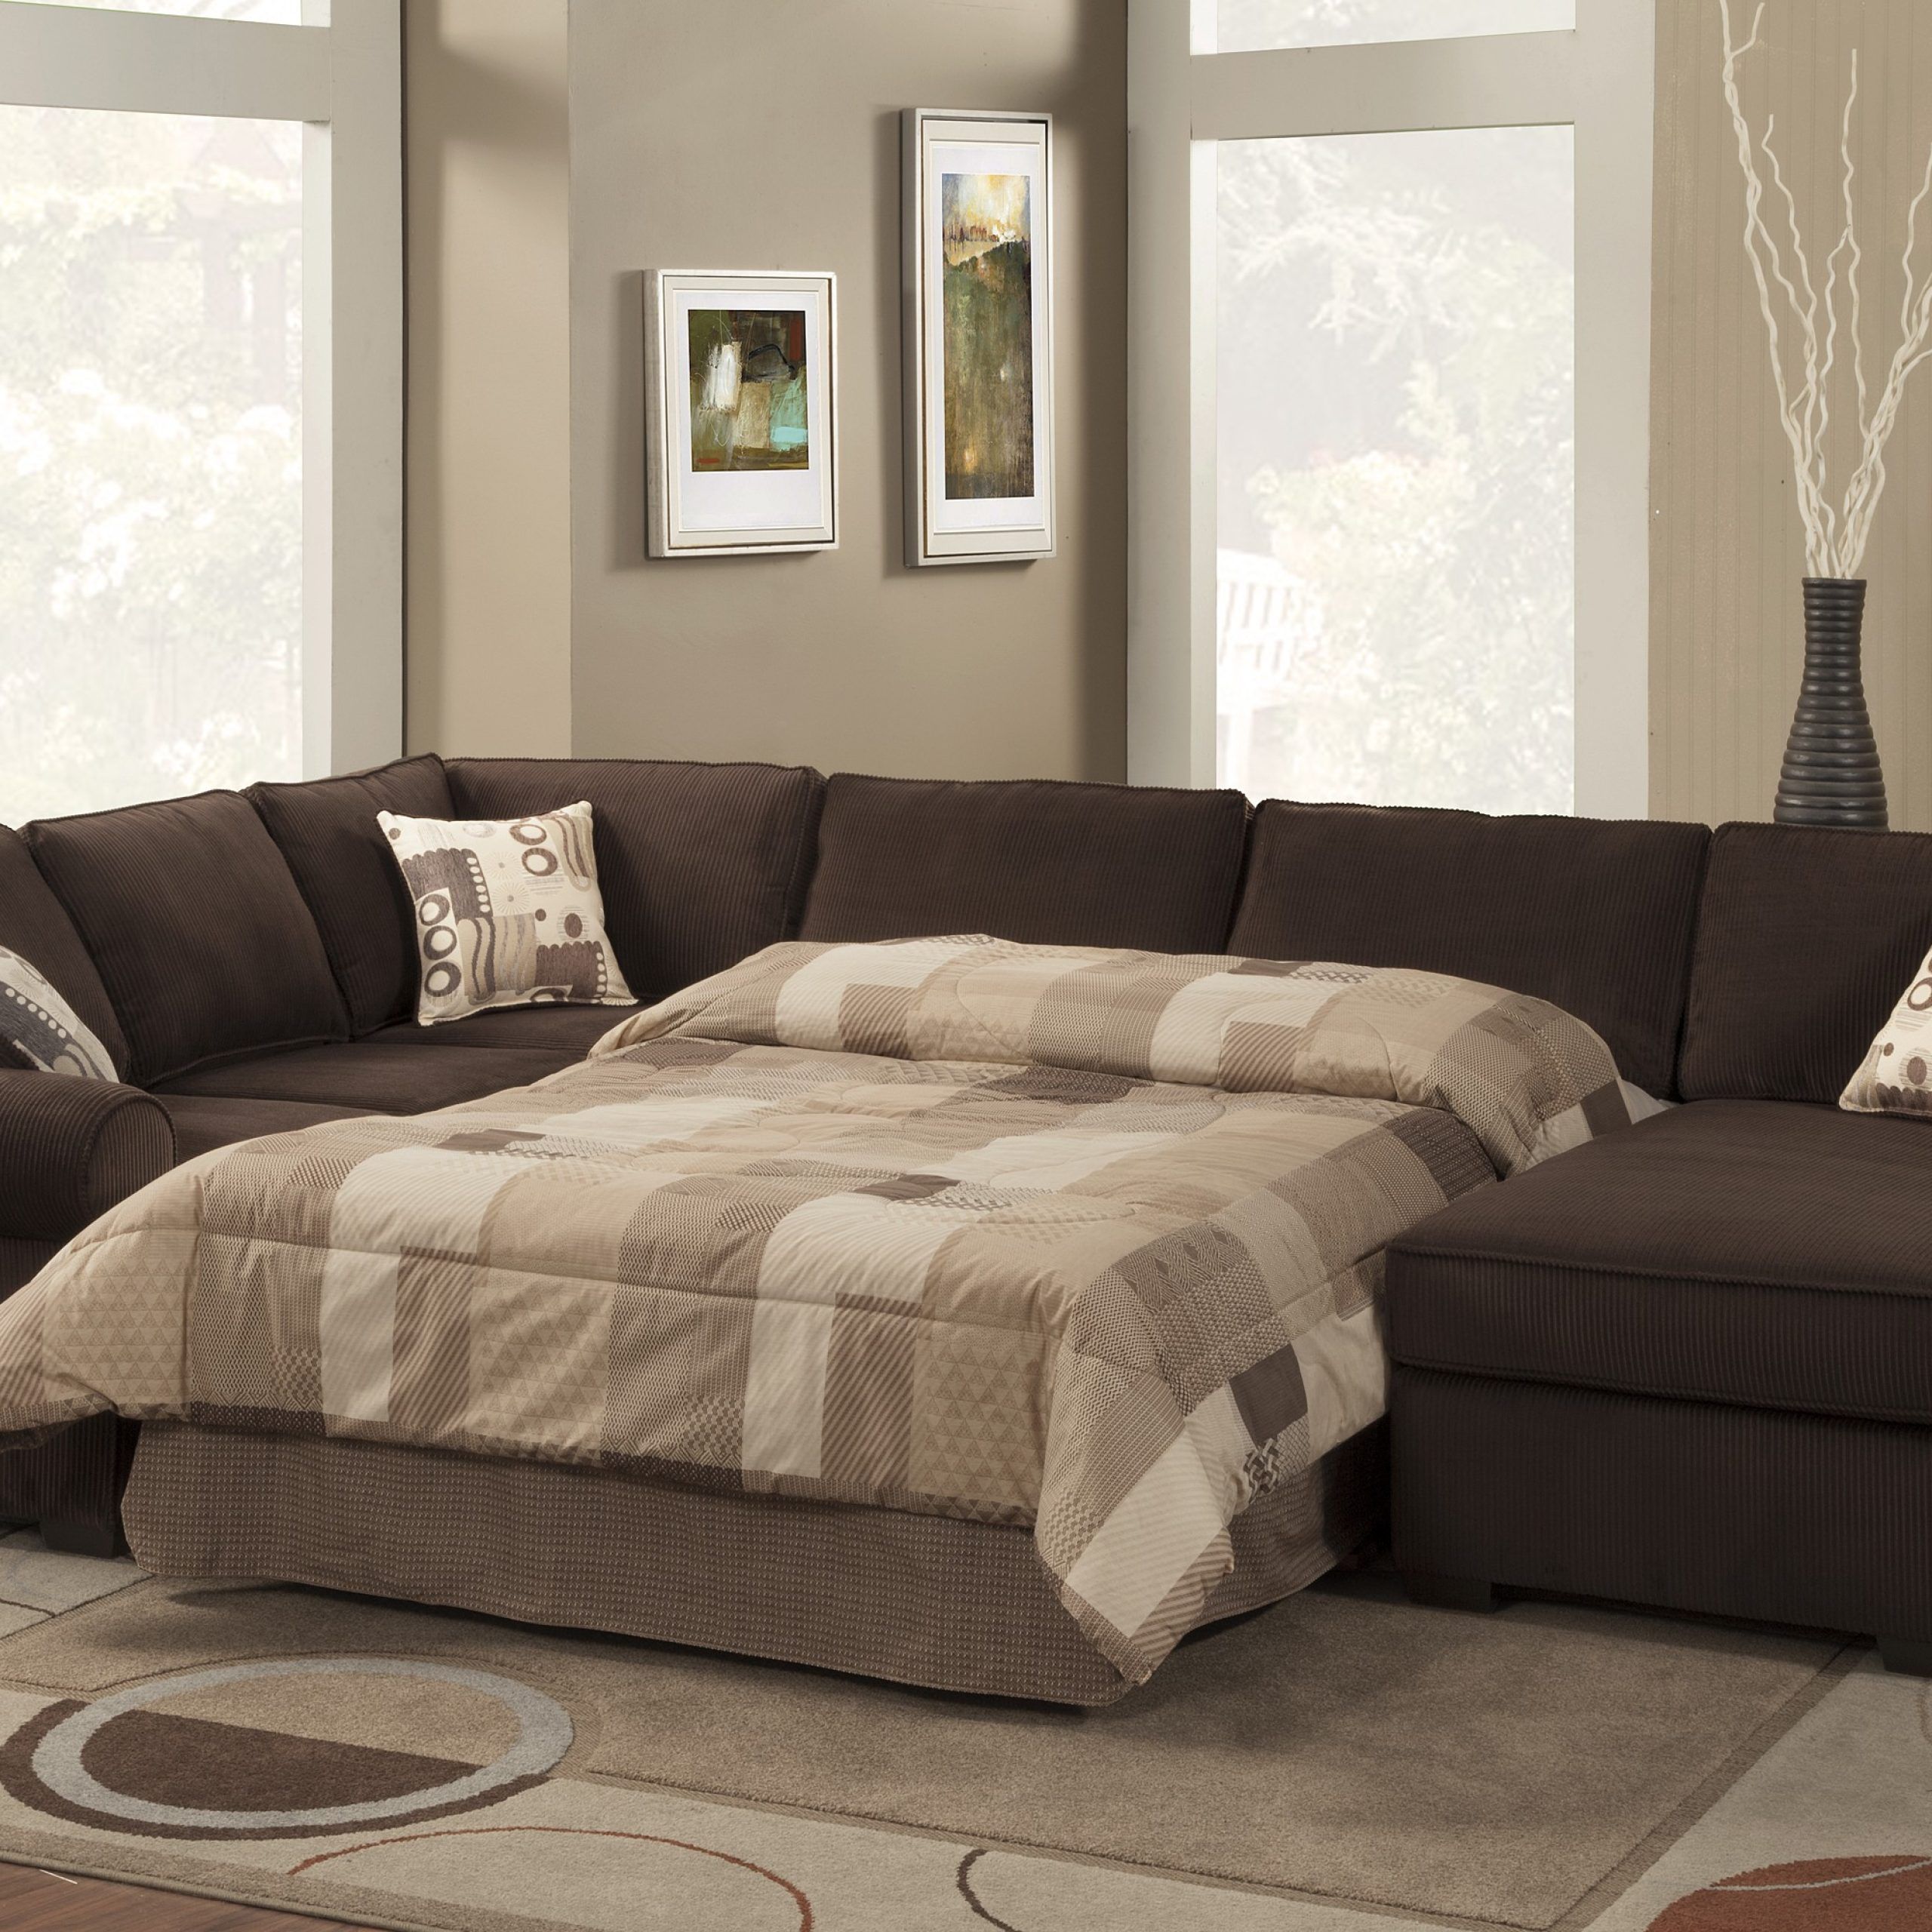 Sectional Sofa Sleepers For Better Sleep Quality And Comfort – Homesfeed With Left Or Right Facing Sleeper Sectionals (Gallery 15 of 21)